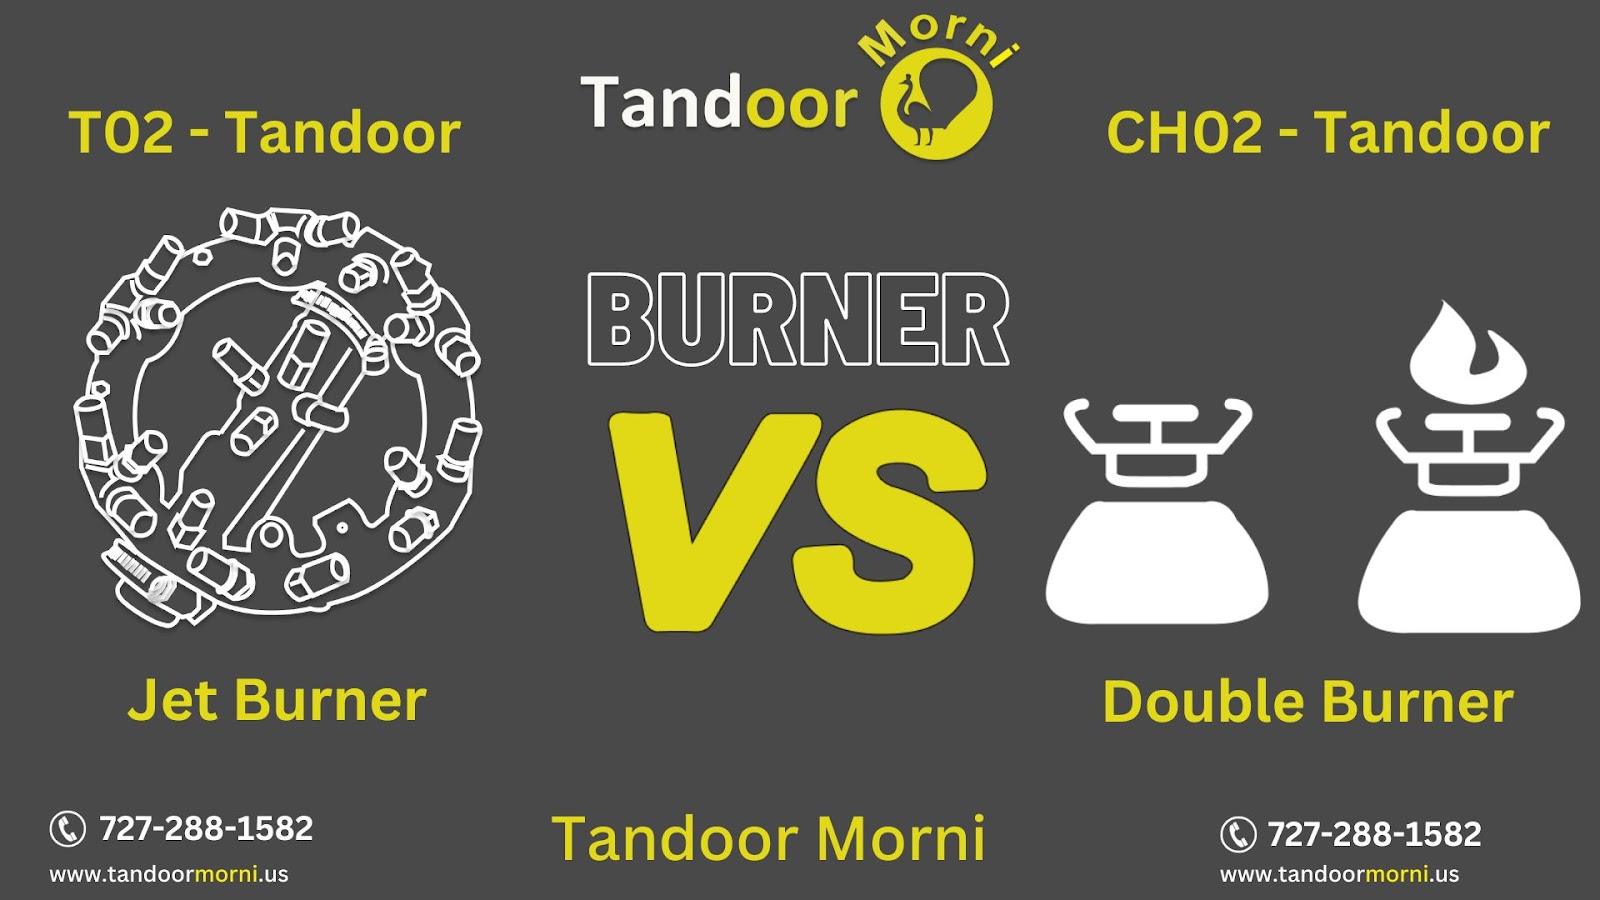 T02 is a jet burner, whereas CH02 is a double burner.